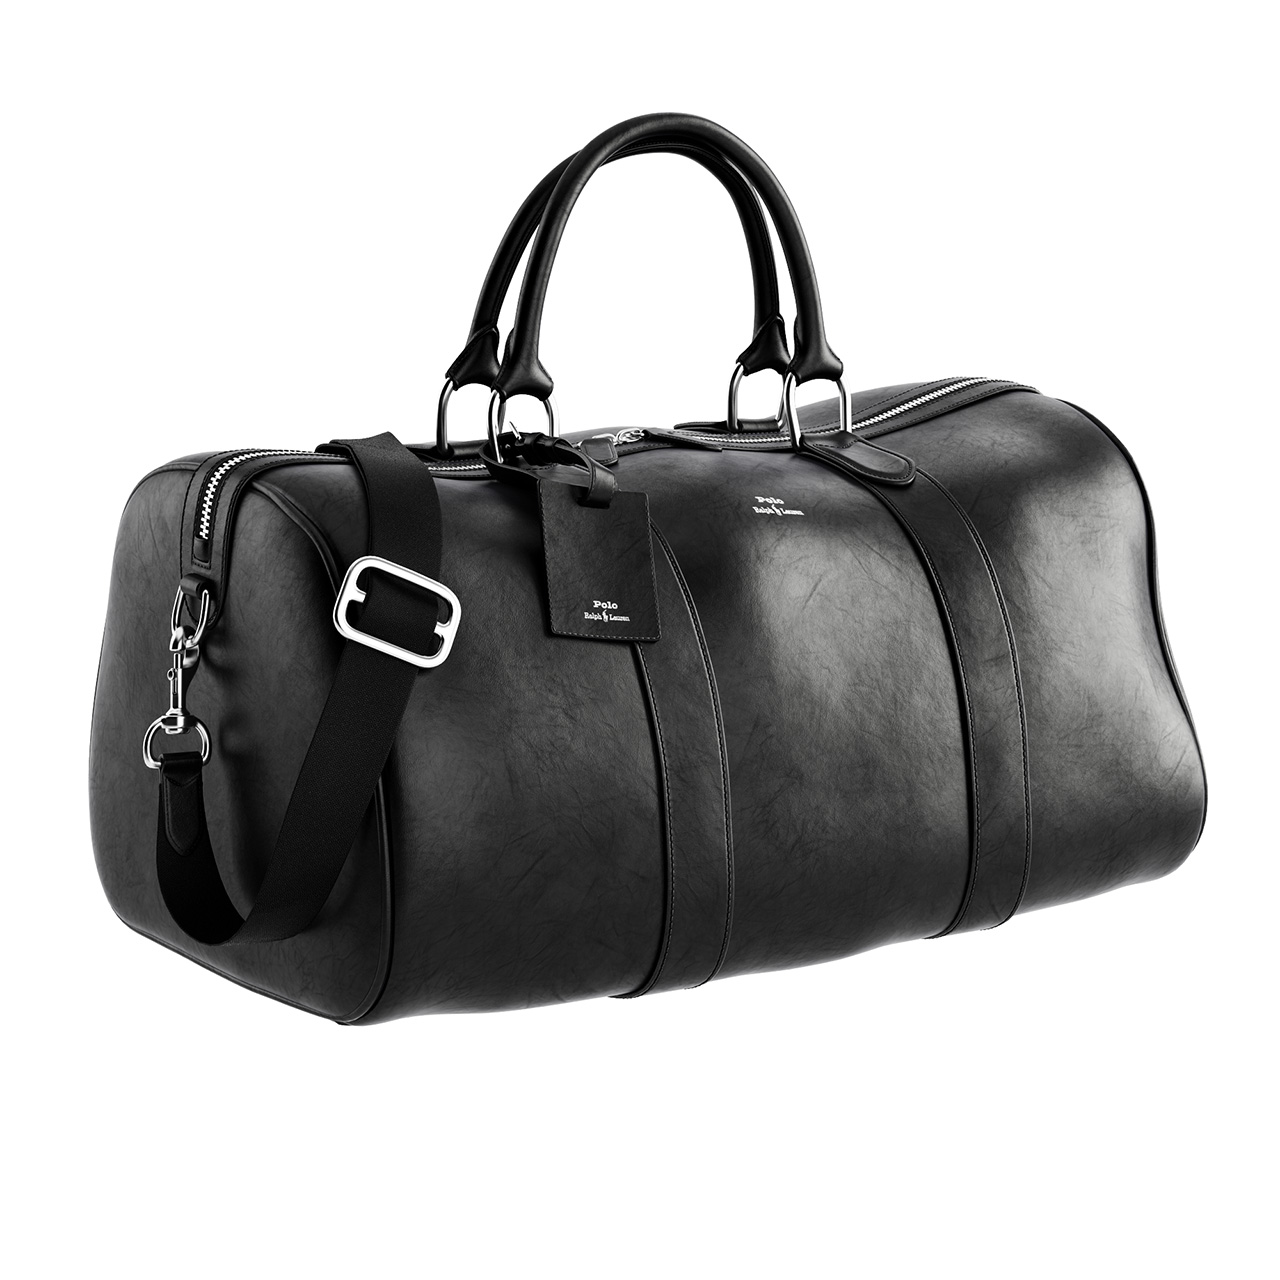 Smooth Leather Duffel Bag by Polo Ralph Lauren